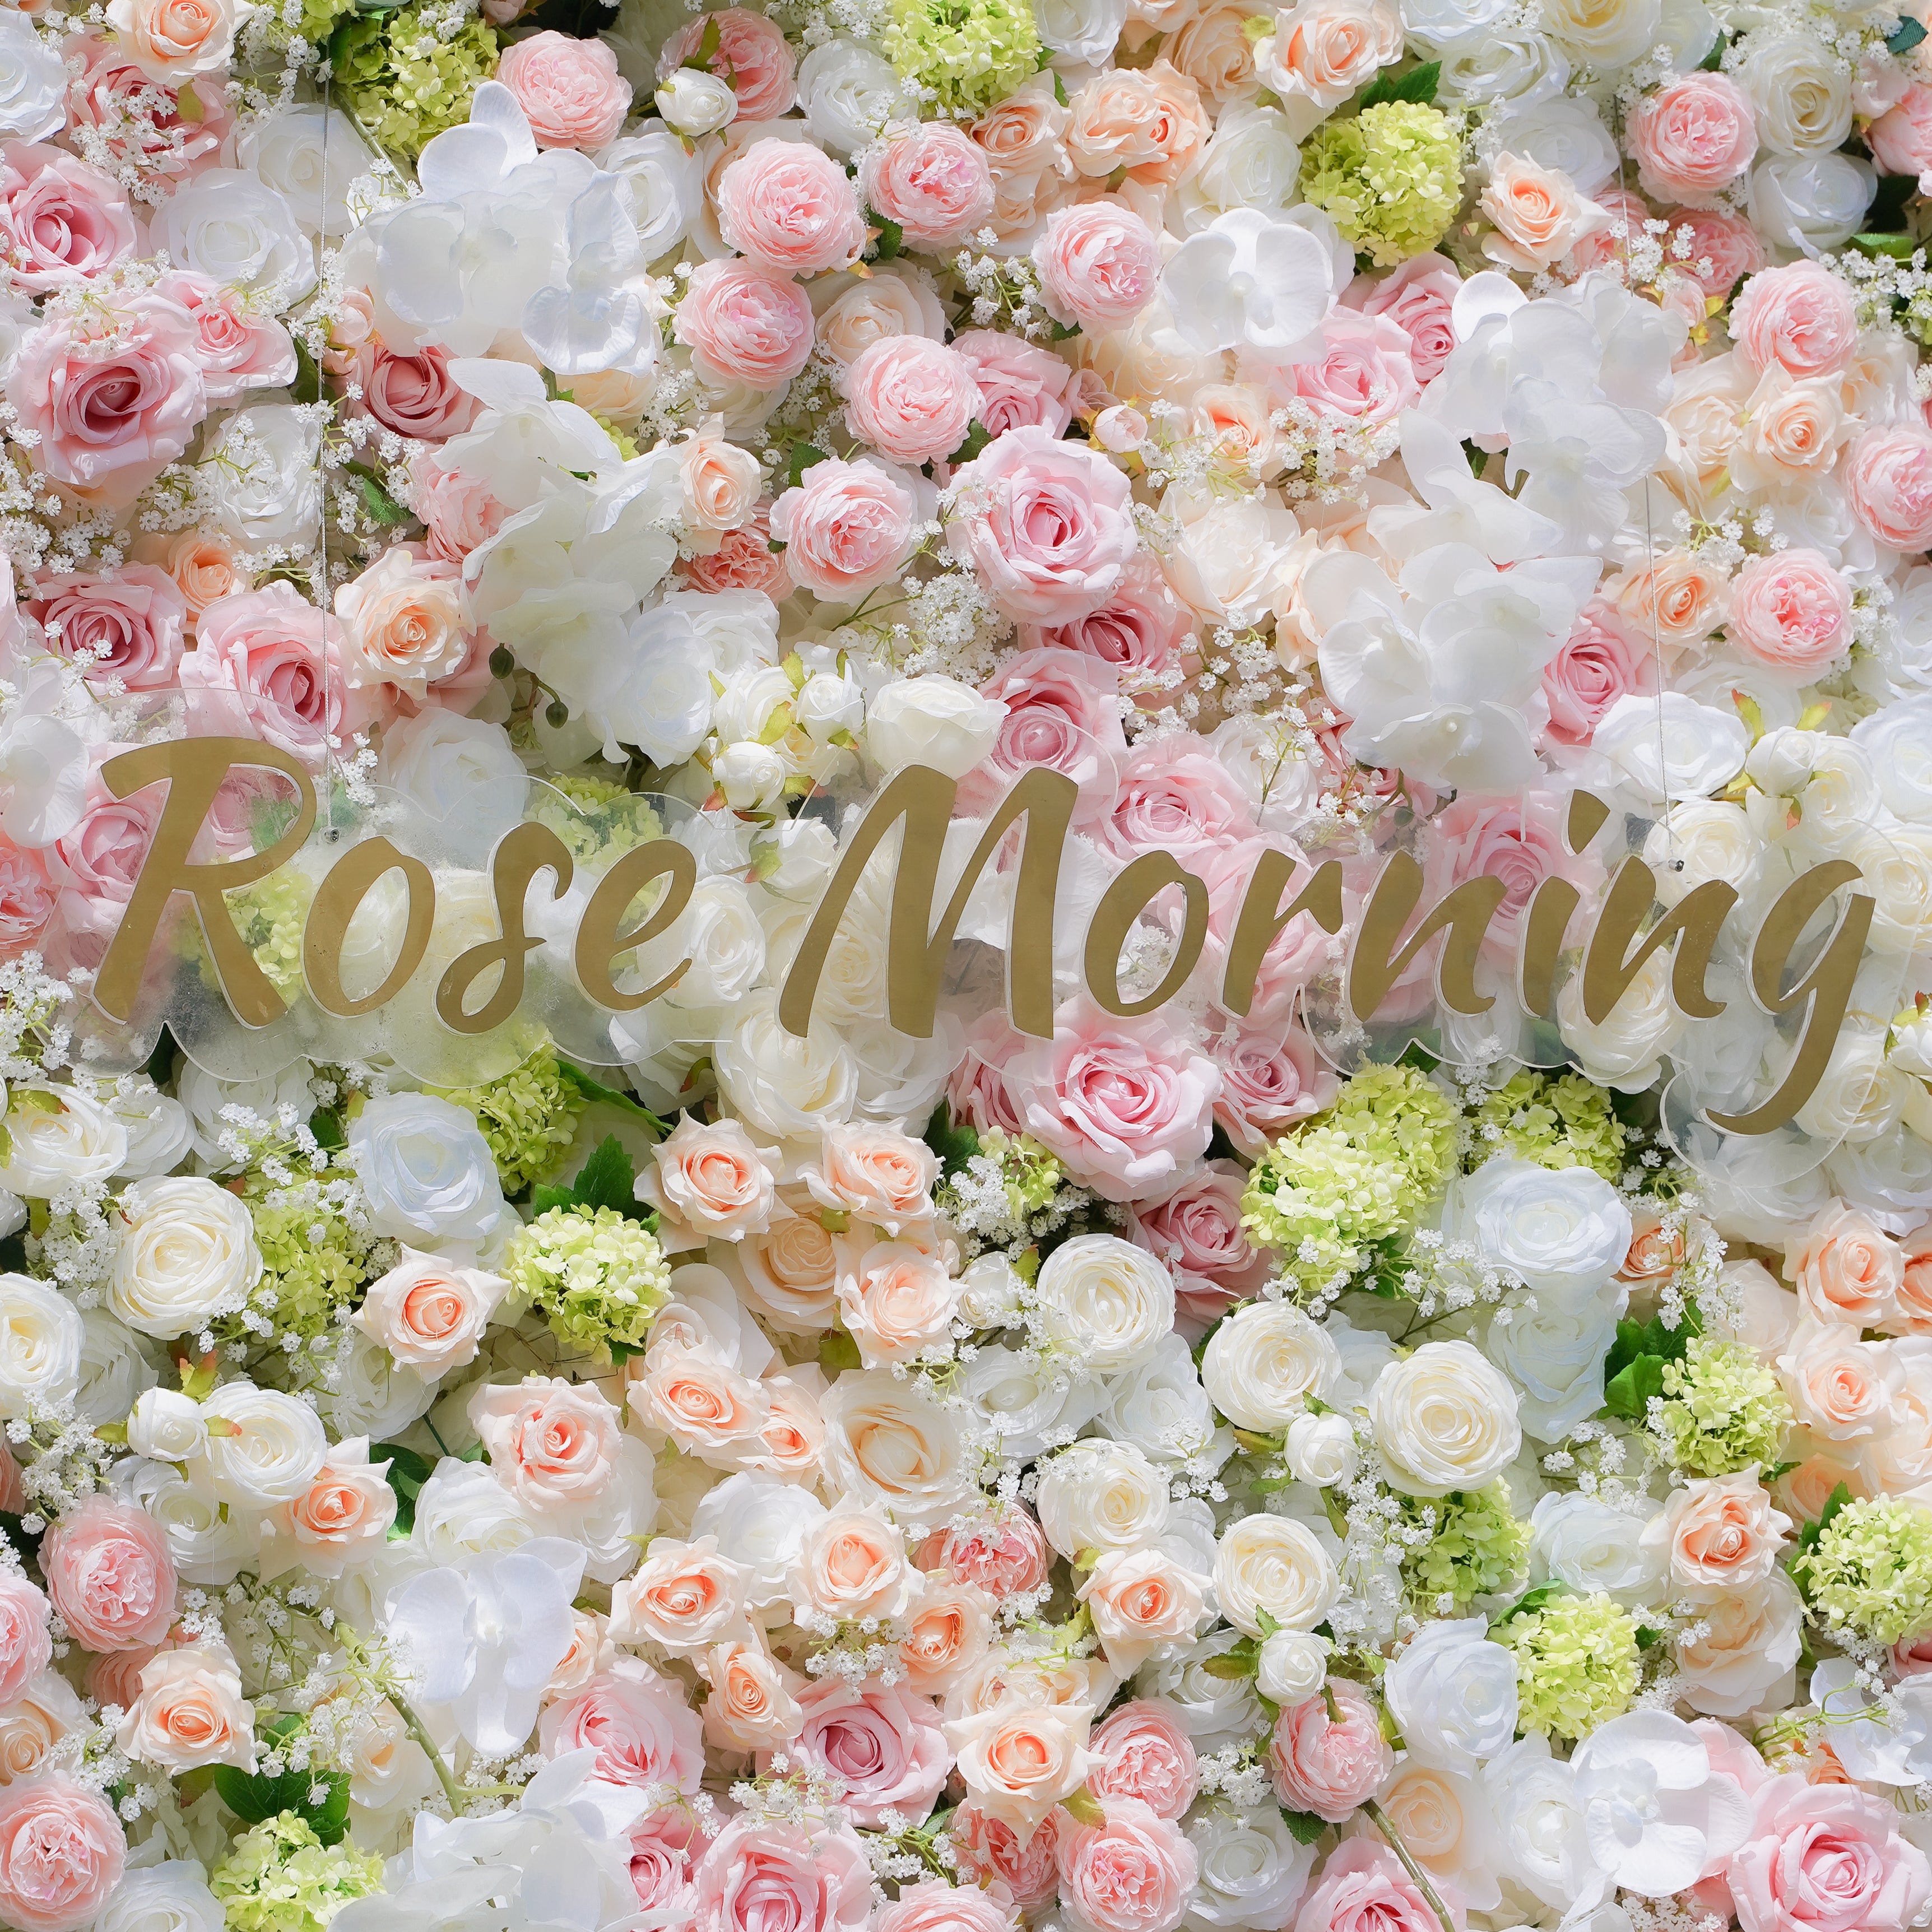 Mariah:  3D Fabric Artificial Flower Wall Rolling Up Curtain Flower Wall 8ft*8ft -R040 Rose Morning